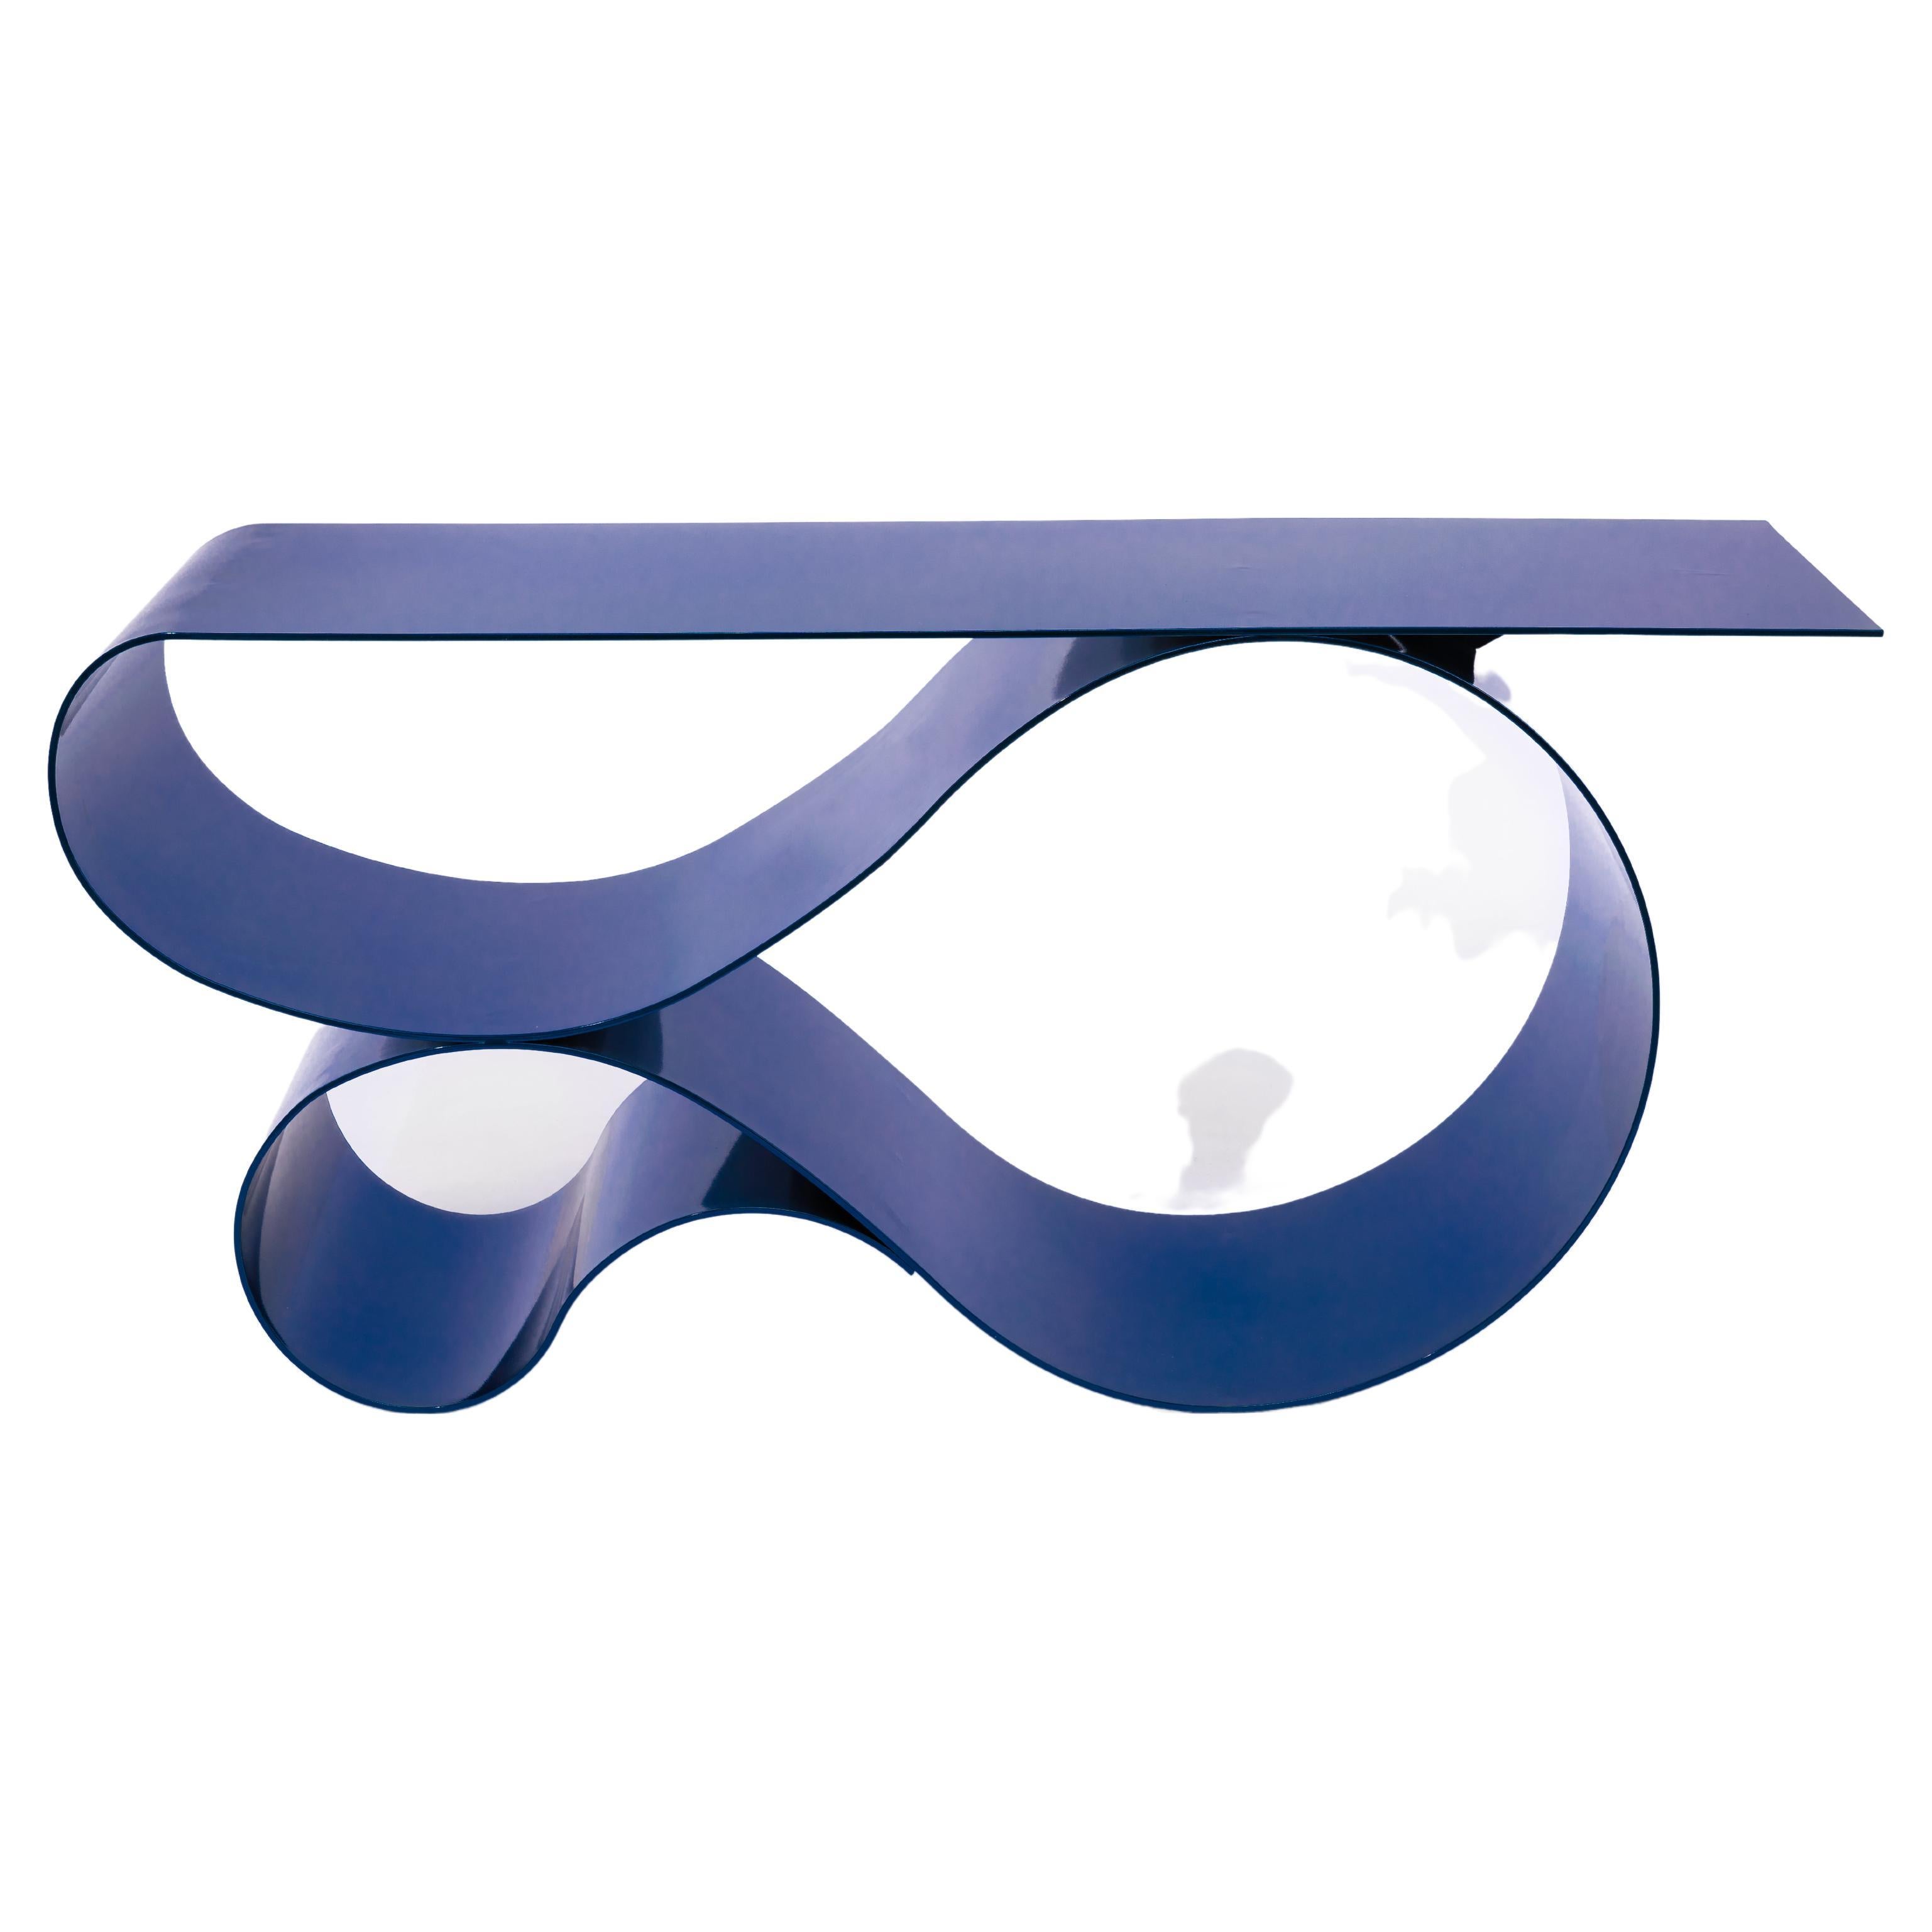 Whorl Console in Blue Powder Coated Aluminum by Neal Aronowitz Design